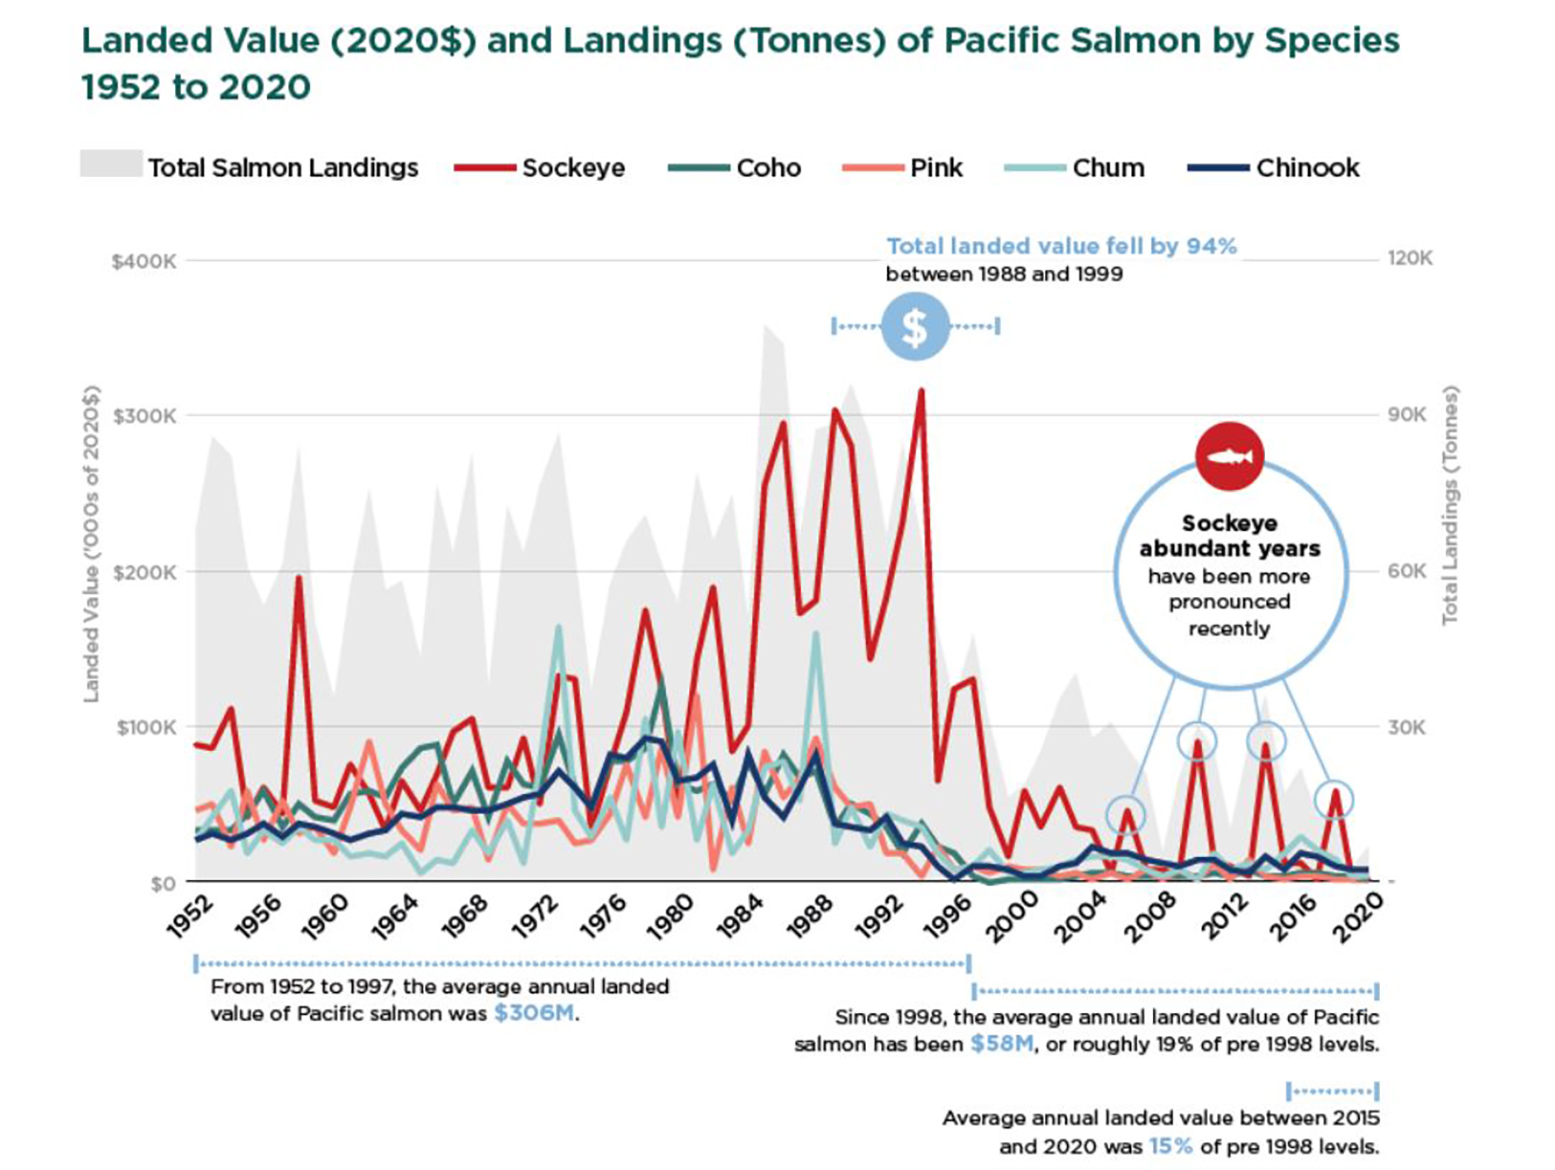 Landed value (2020$) and landings (tonnes) of Pacific salmon by species 1952 to 2020